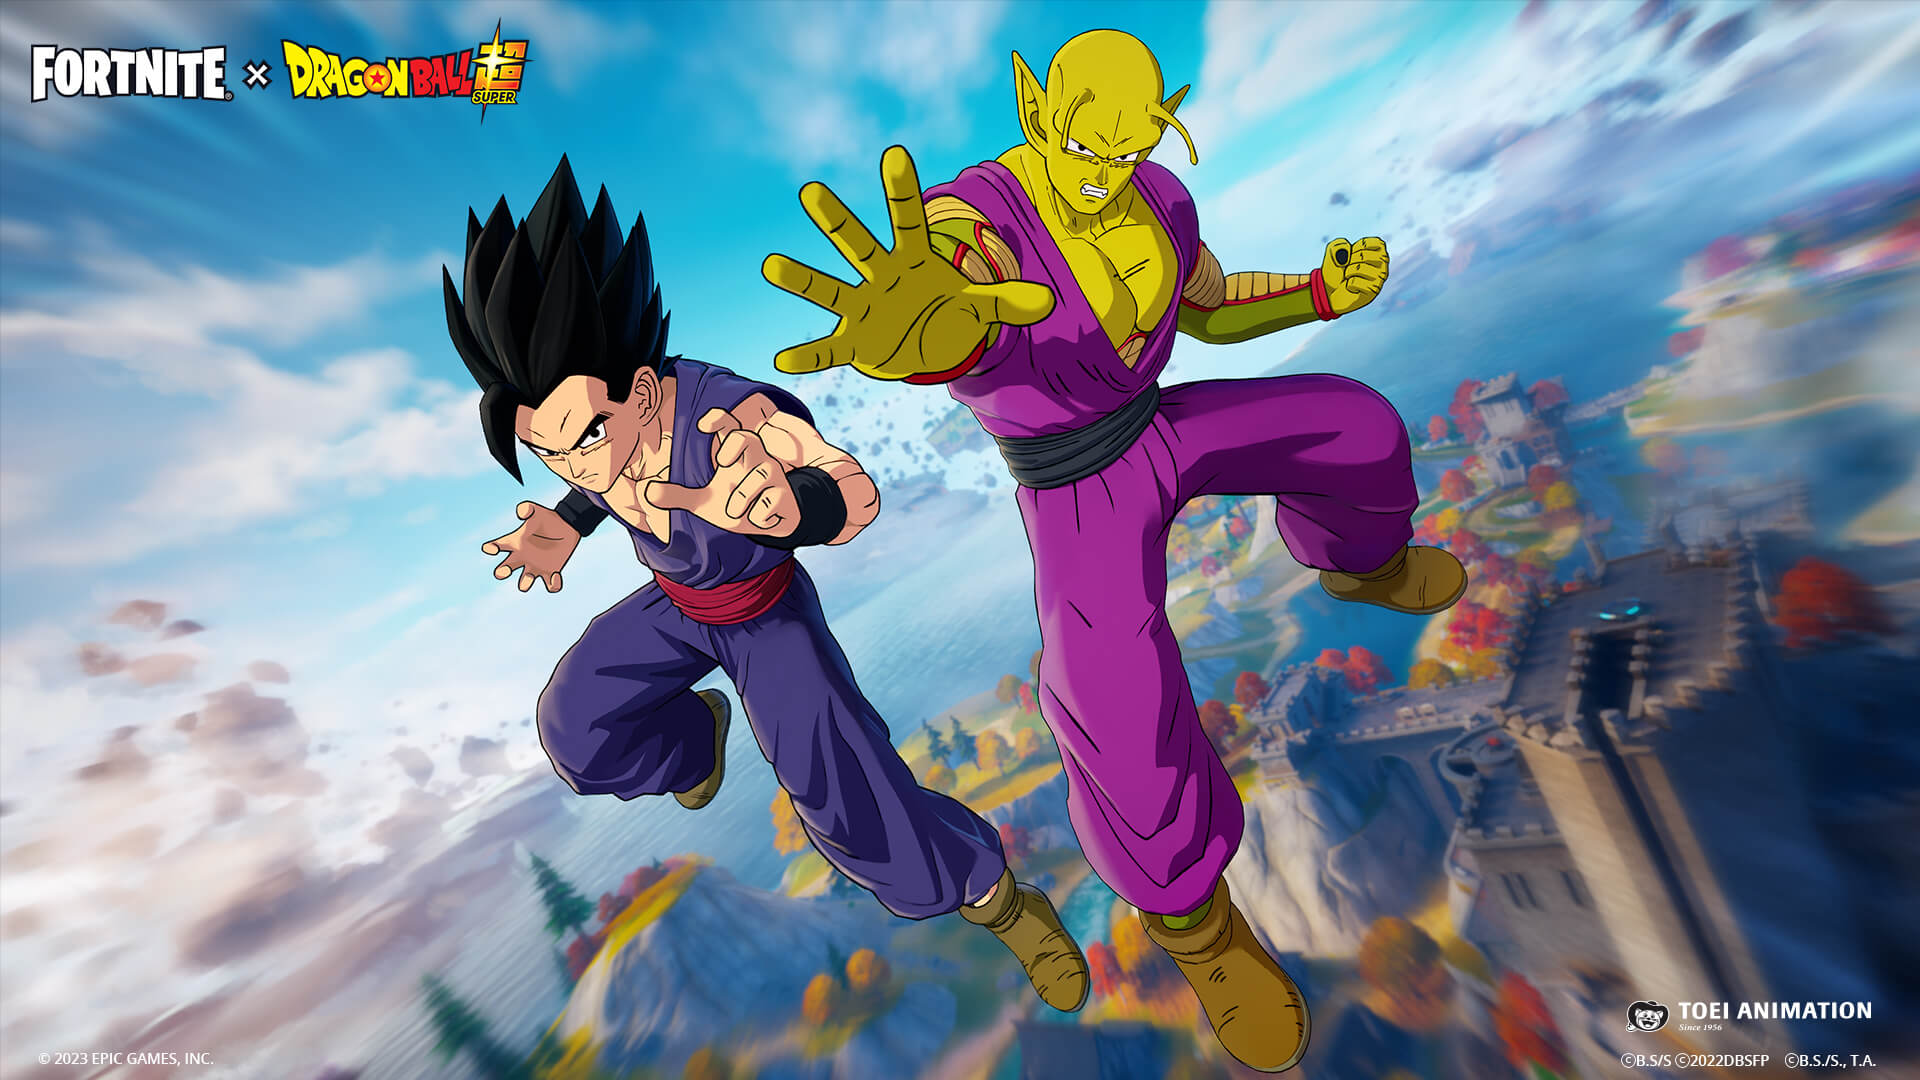 Key art of Son Gohan and Piccolo as featured in the second Fortnite x Dragon Ball Super crossover event.